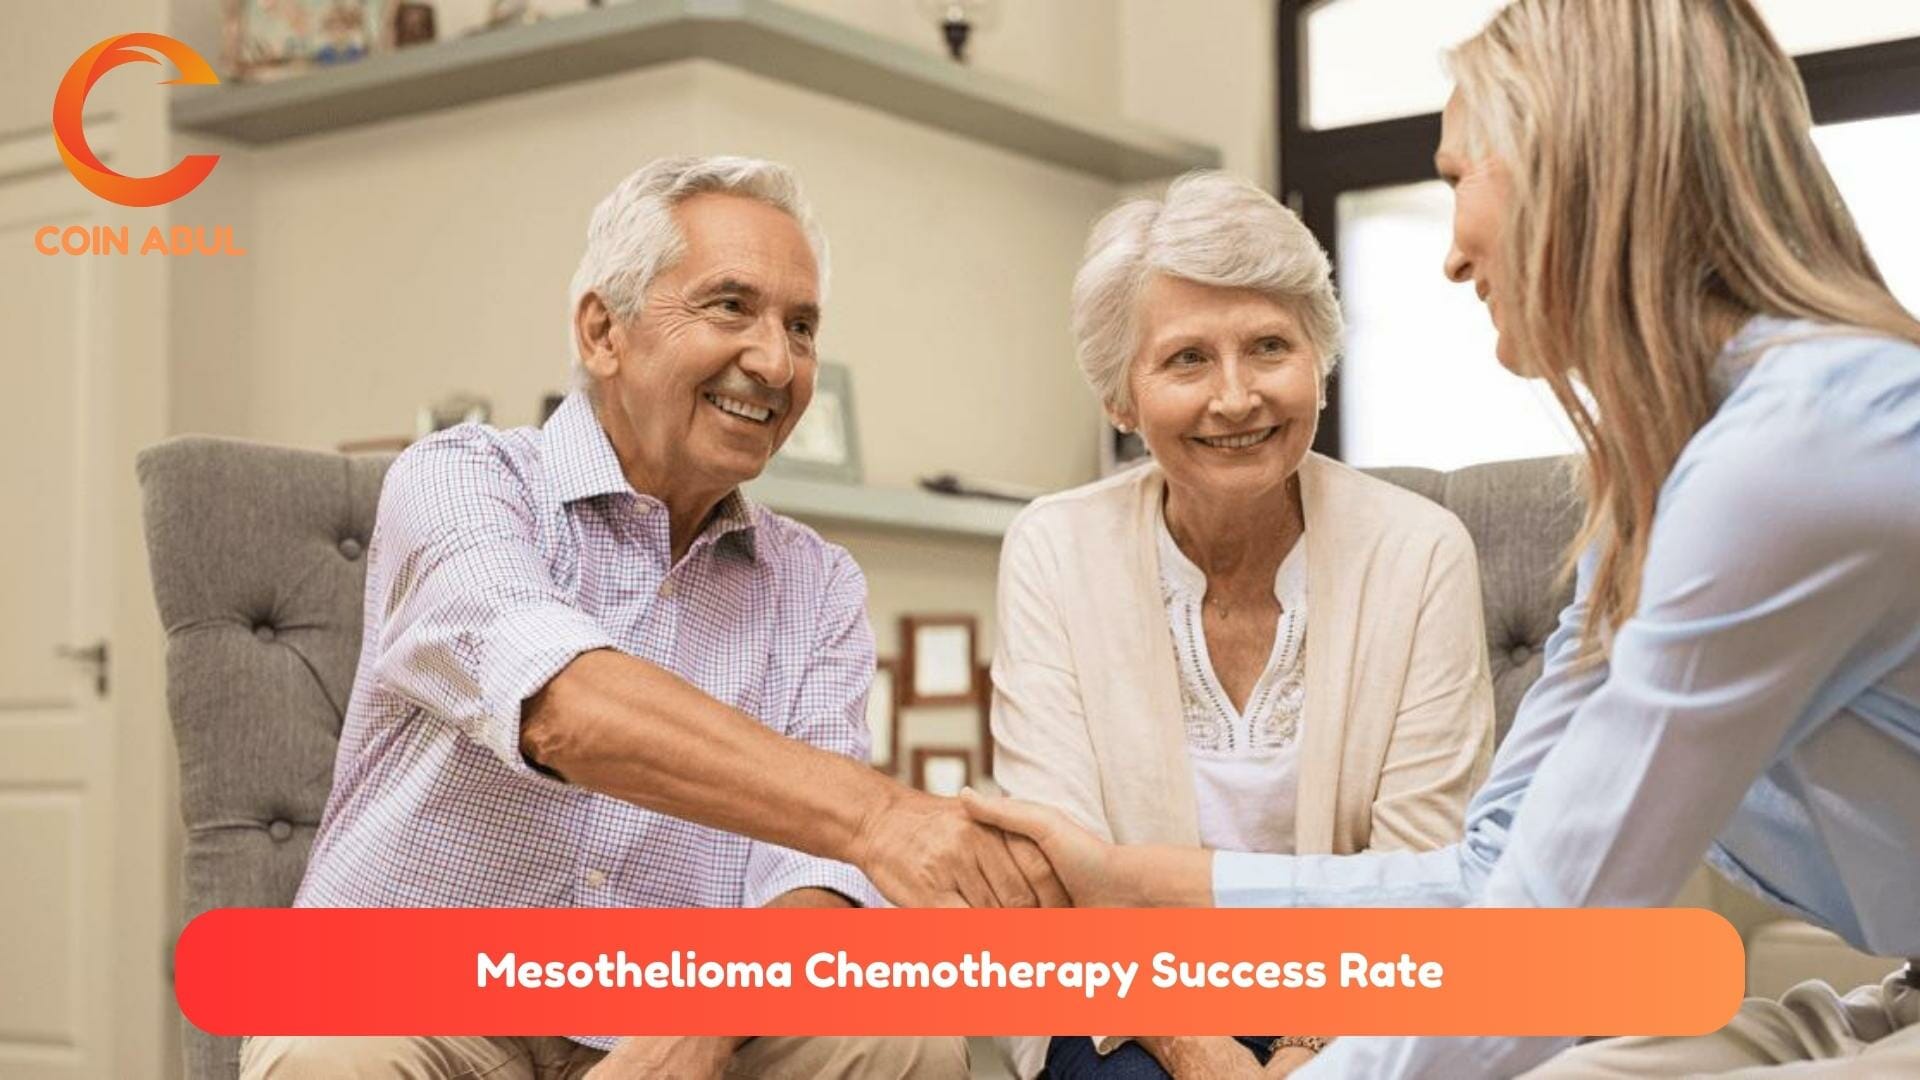 Mesothelioma Chemotherapy Success Rate